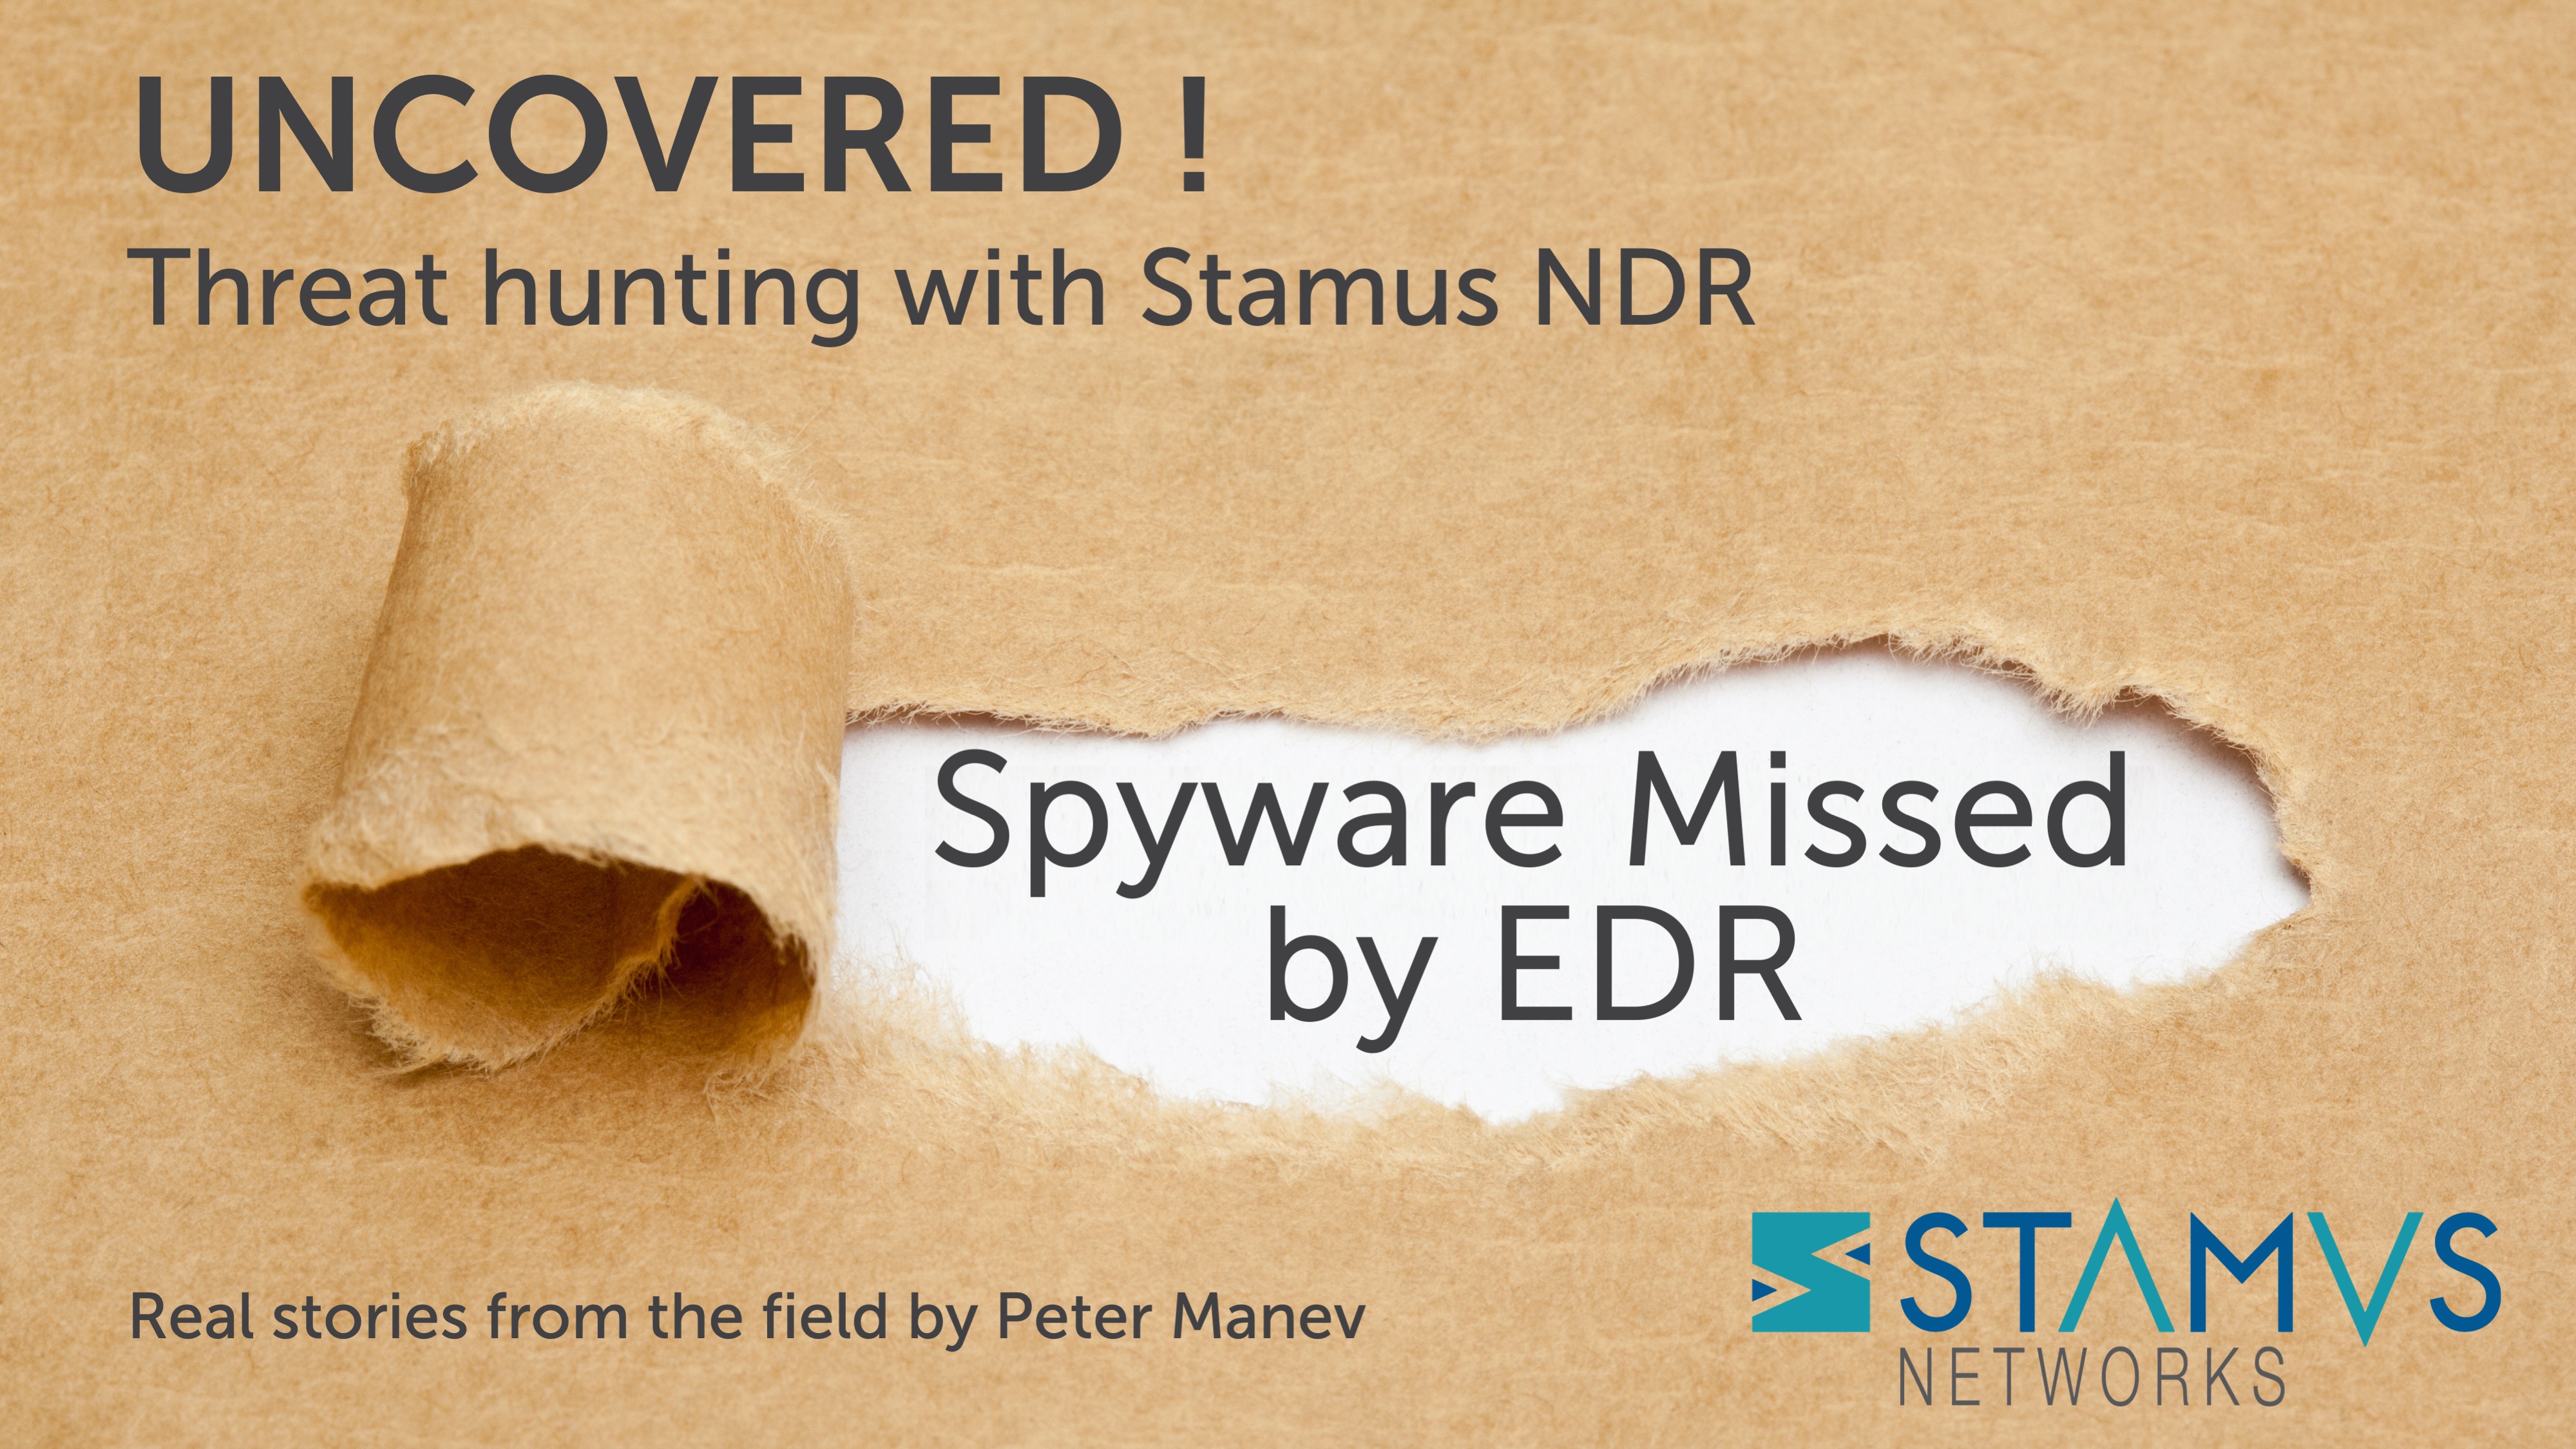 Uncovered with Stamus NDR: Spyware Missed by EDR